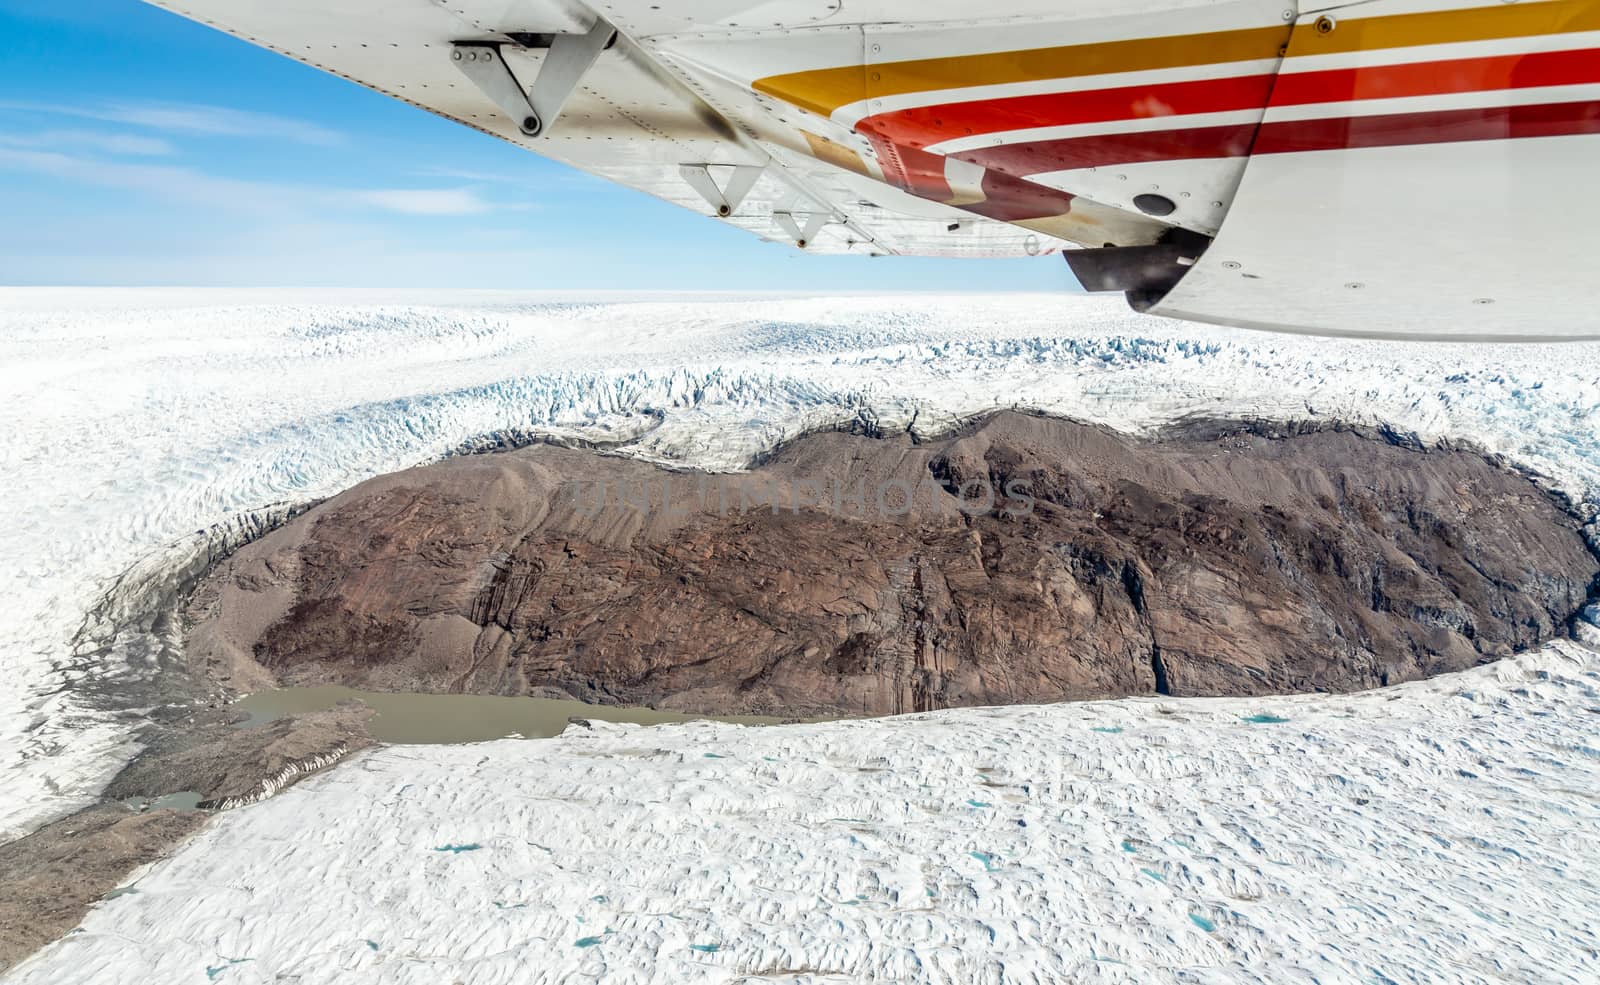 Greenlandic melting ice sheet glacier aerial view from the plane by ambeon